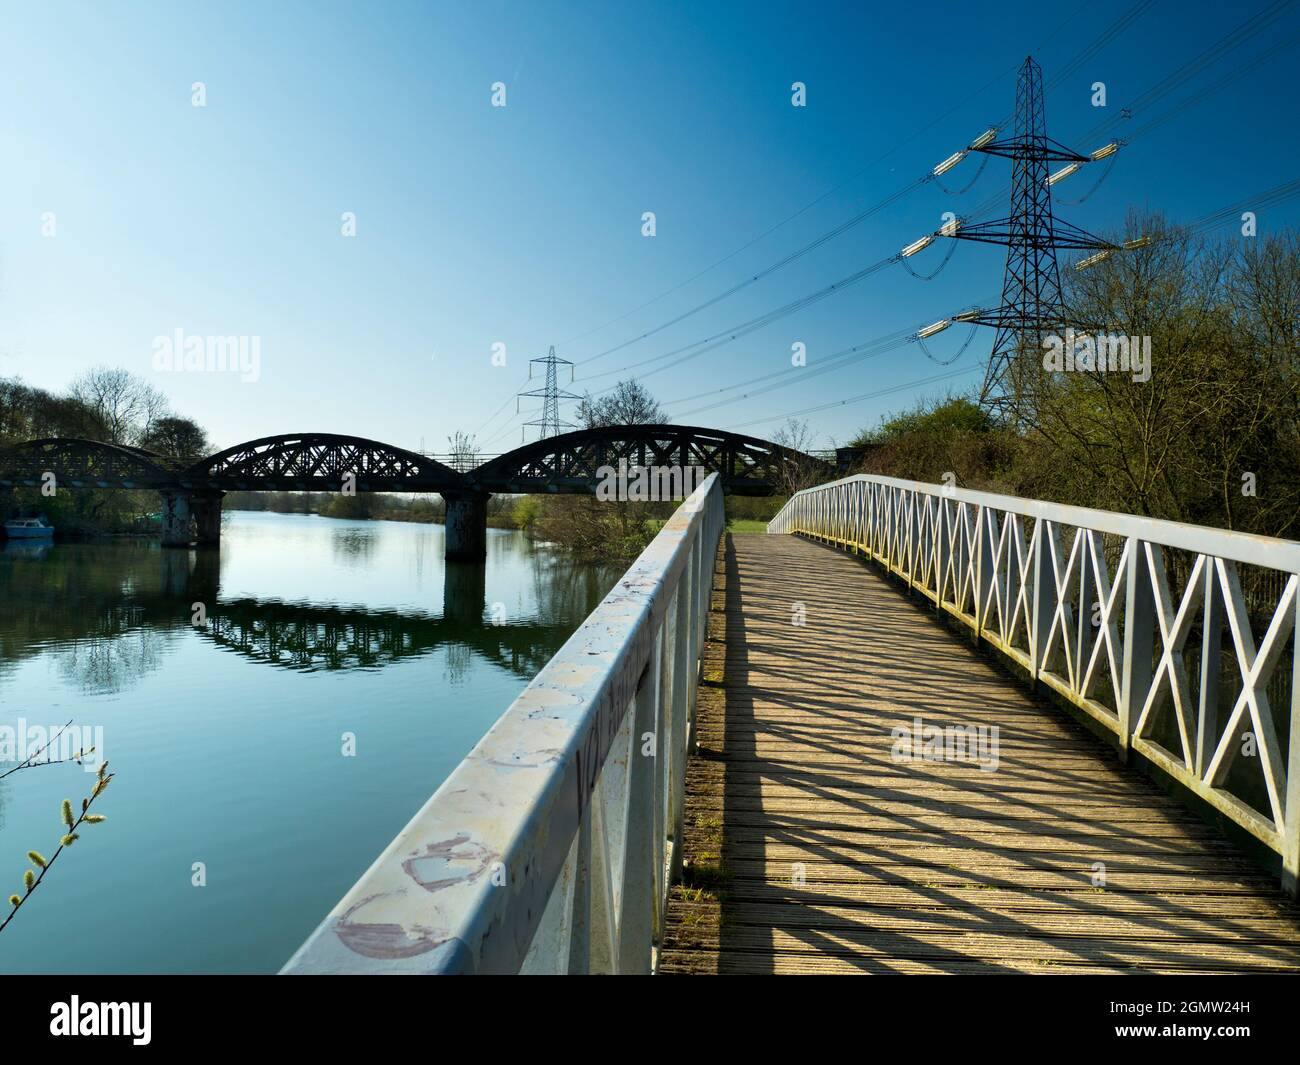 Kennington, Oxfordshire, England - 1 April 2019   Here we see in the background an abandoned railway bridge over the Thames by Kennington, just outsid Stock Photo